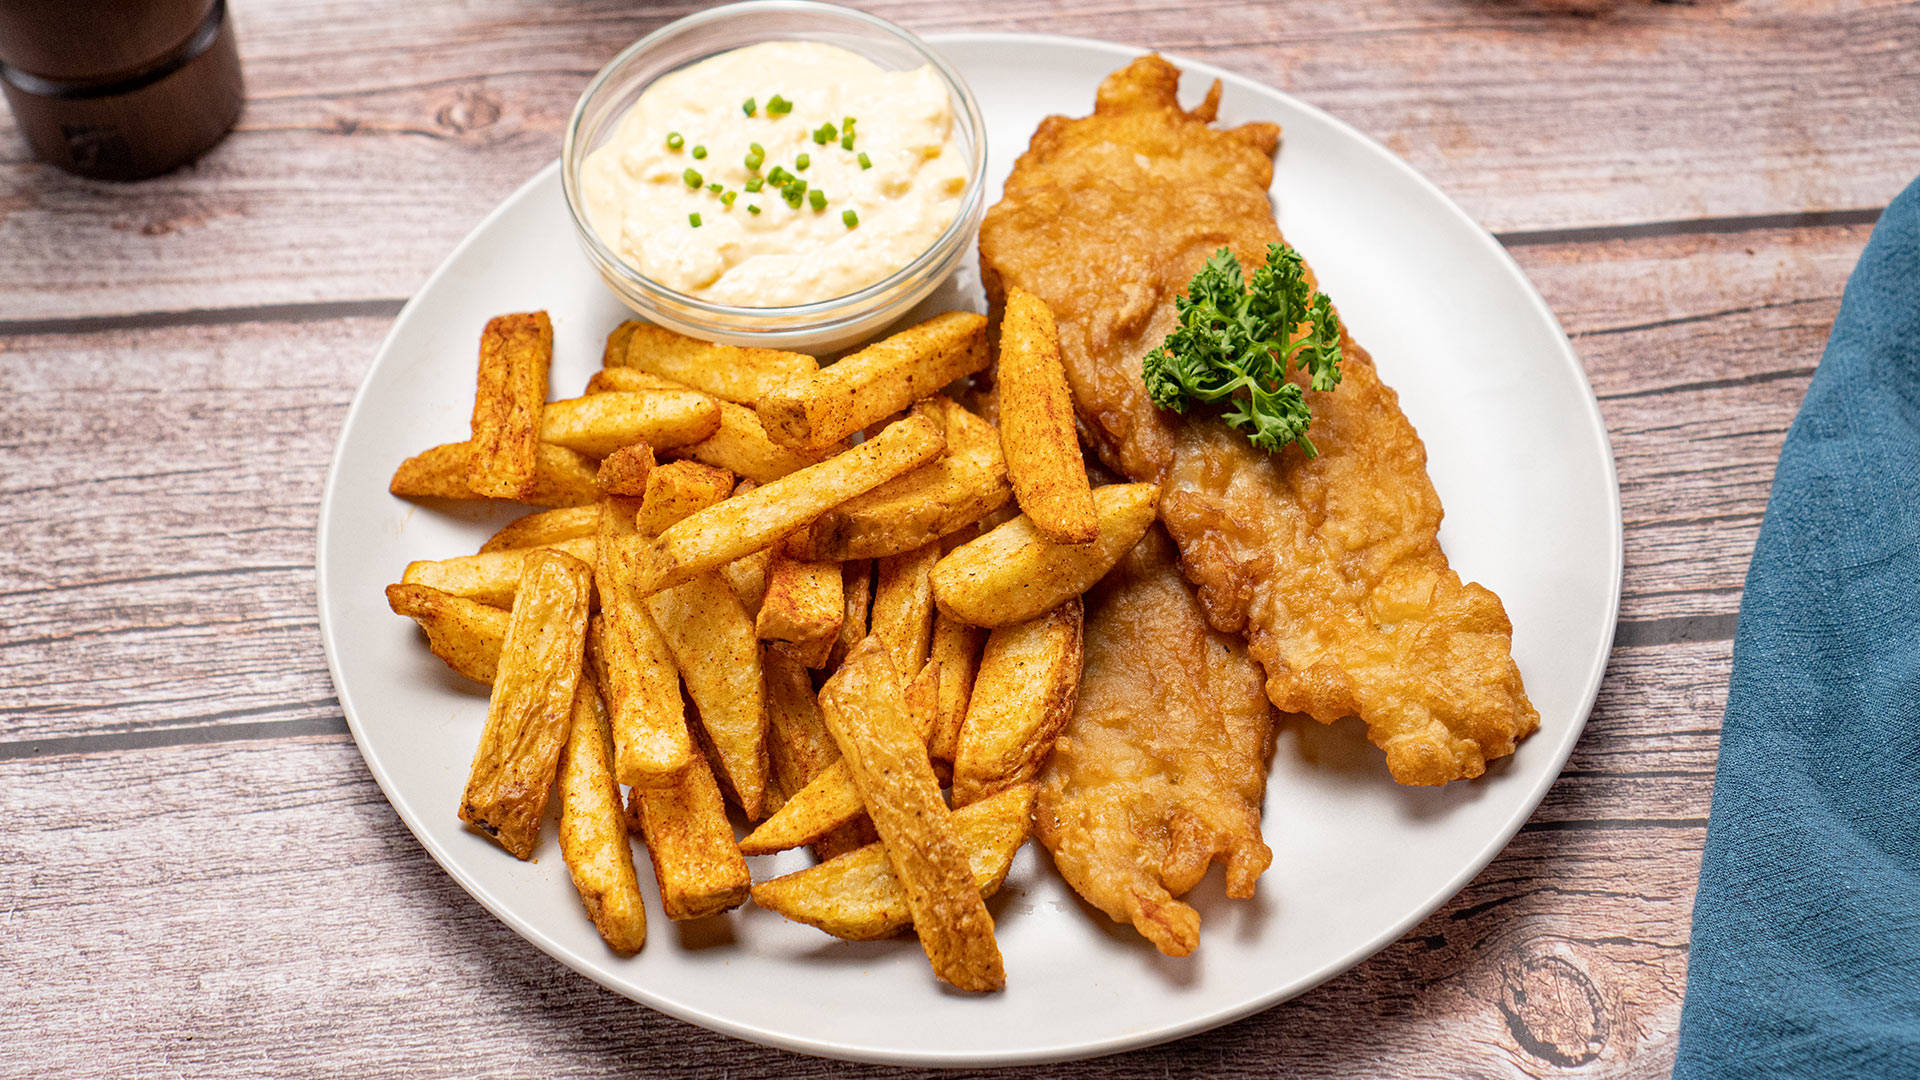 Tasty Big Plate Of Fish And Chips Wallpaper